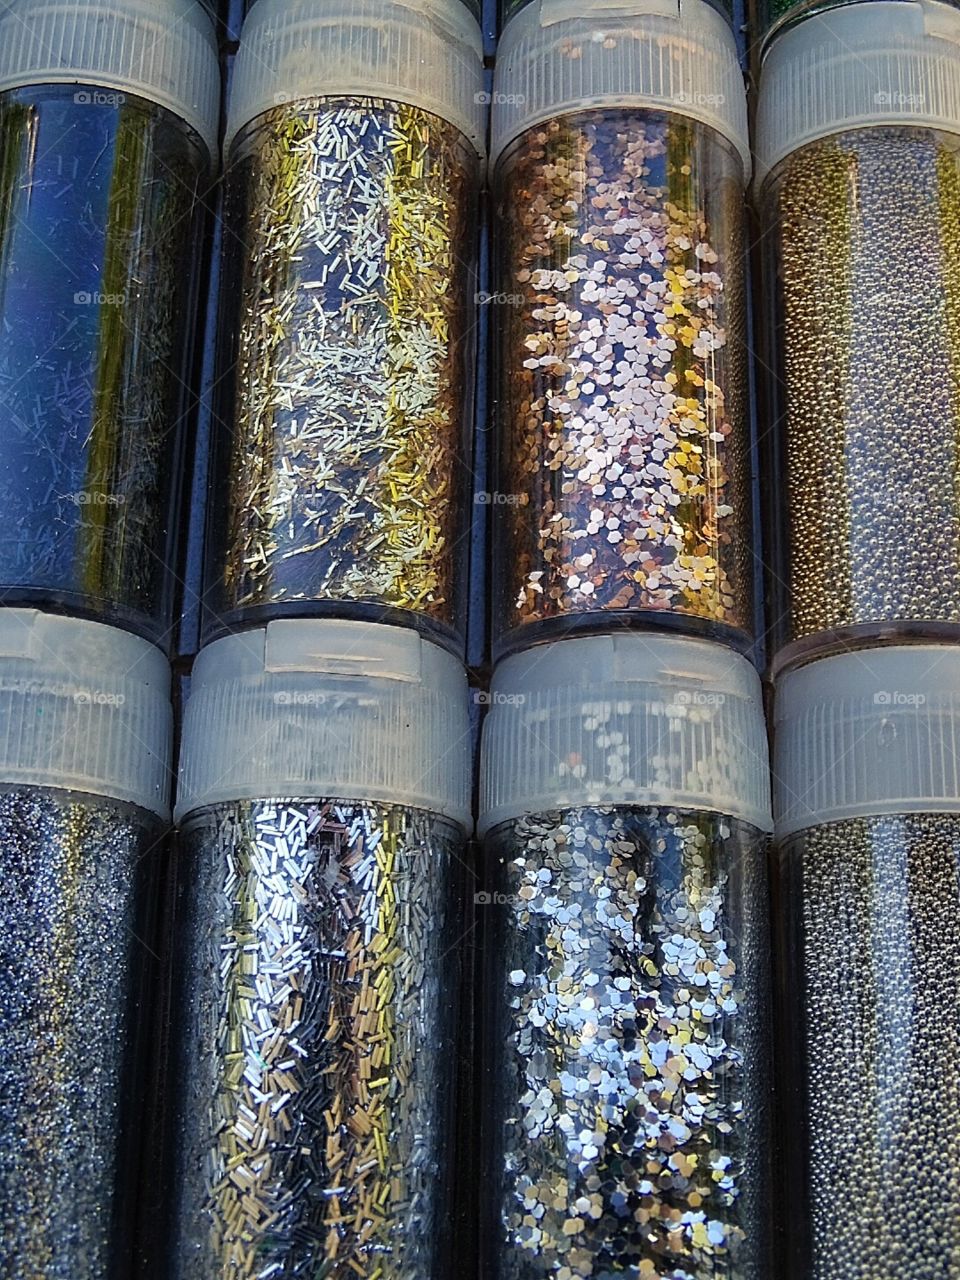 Silver, Gold and Black glitter assortment